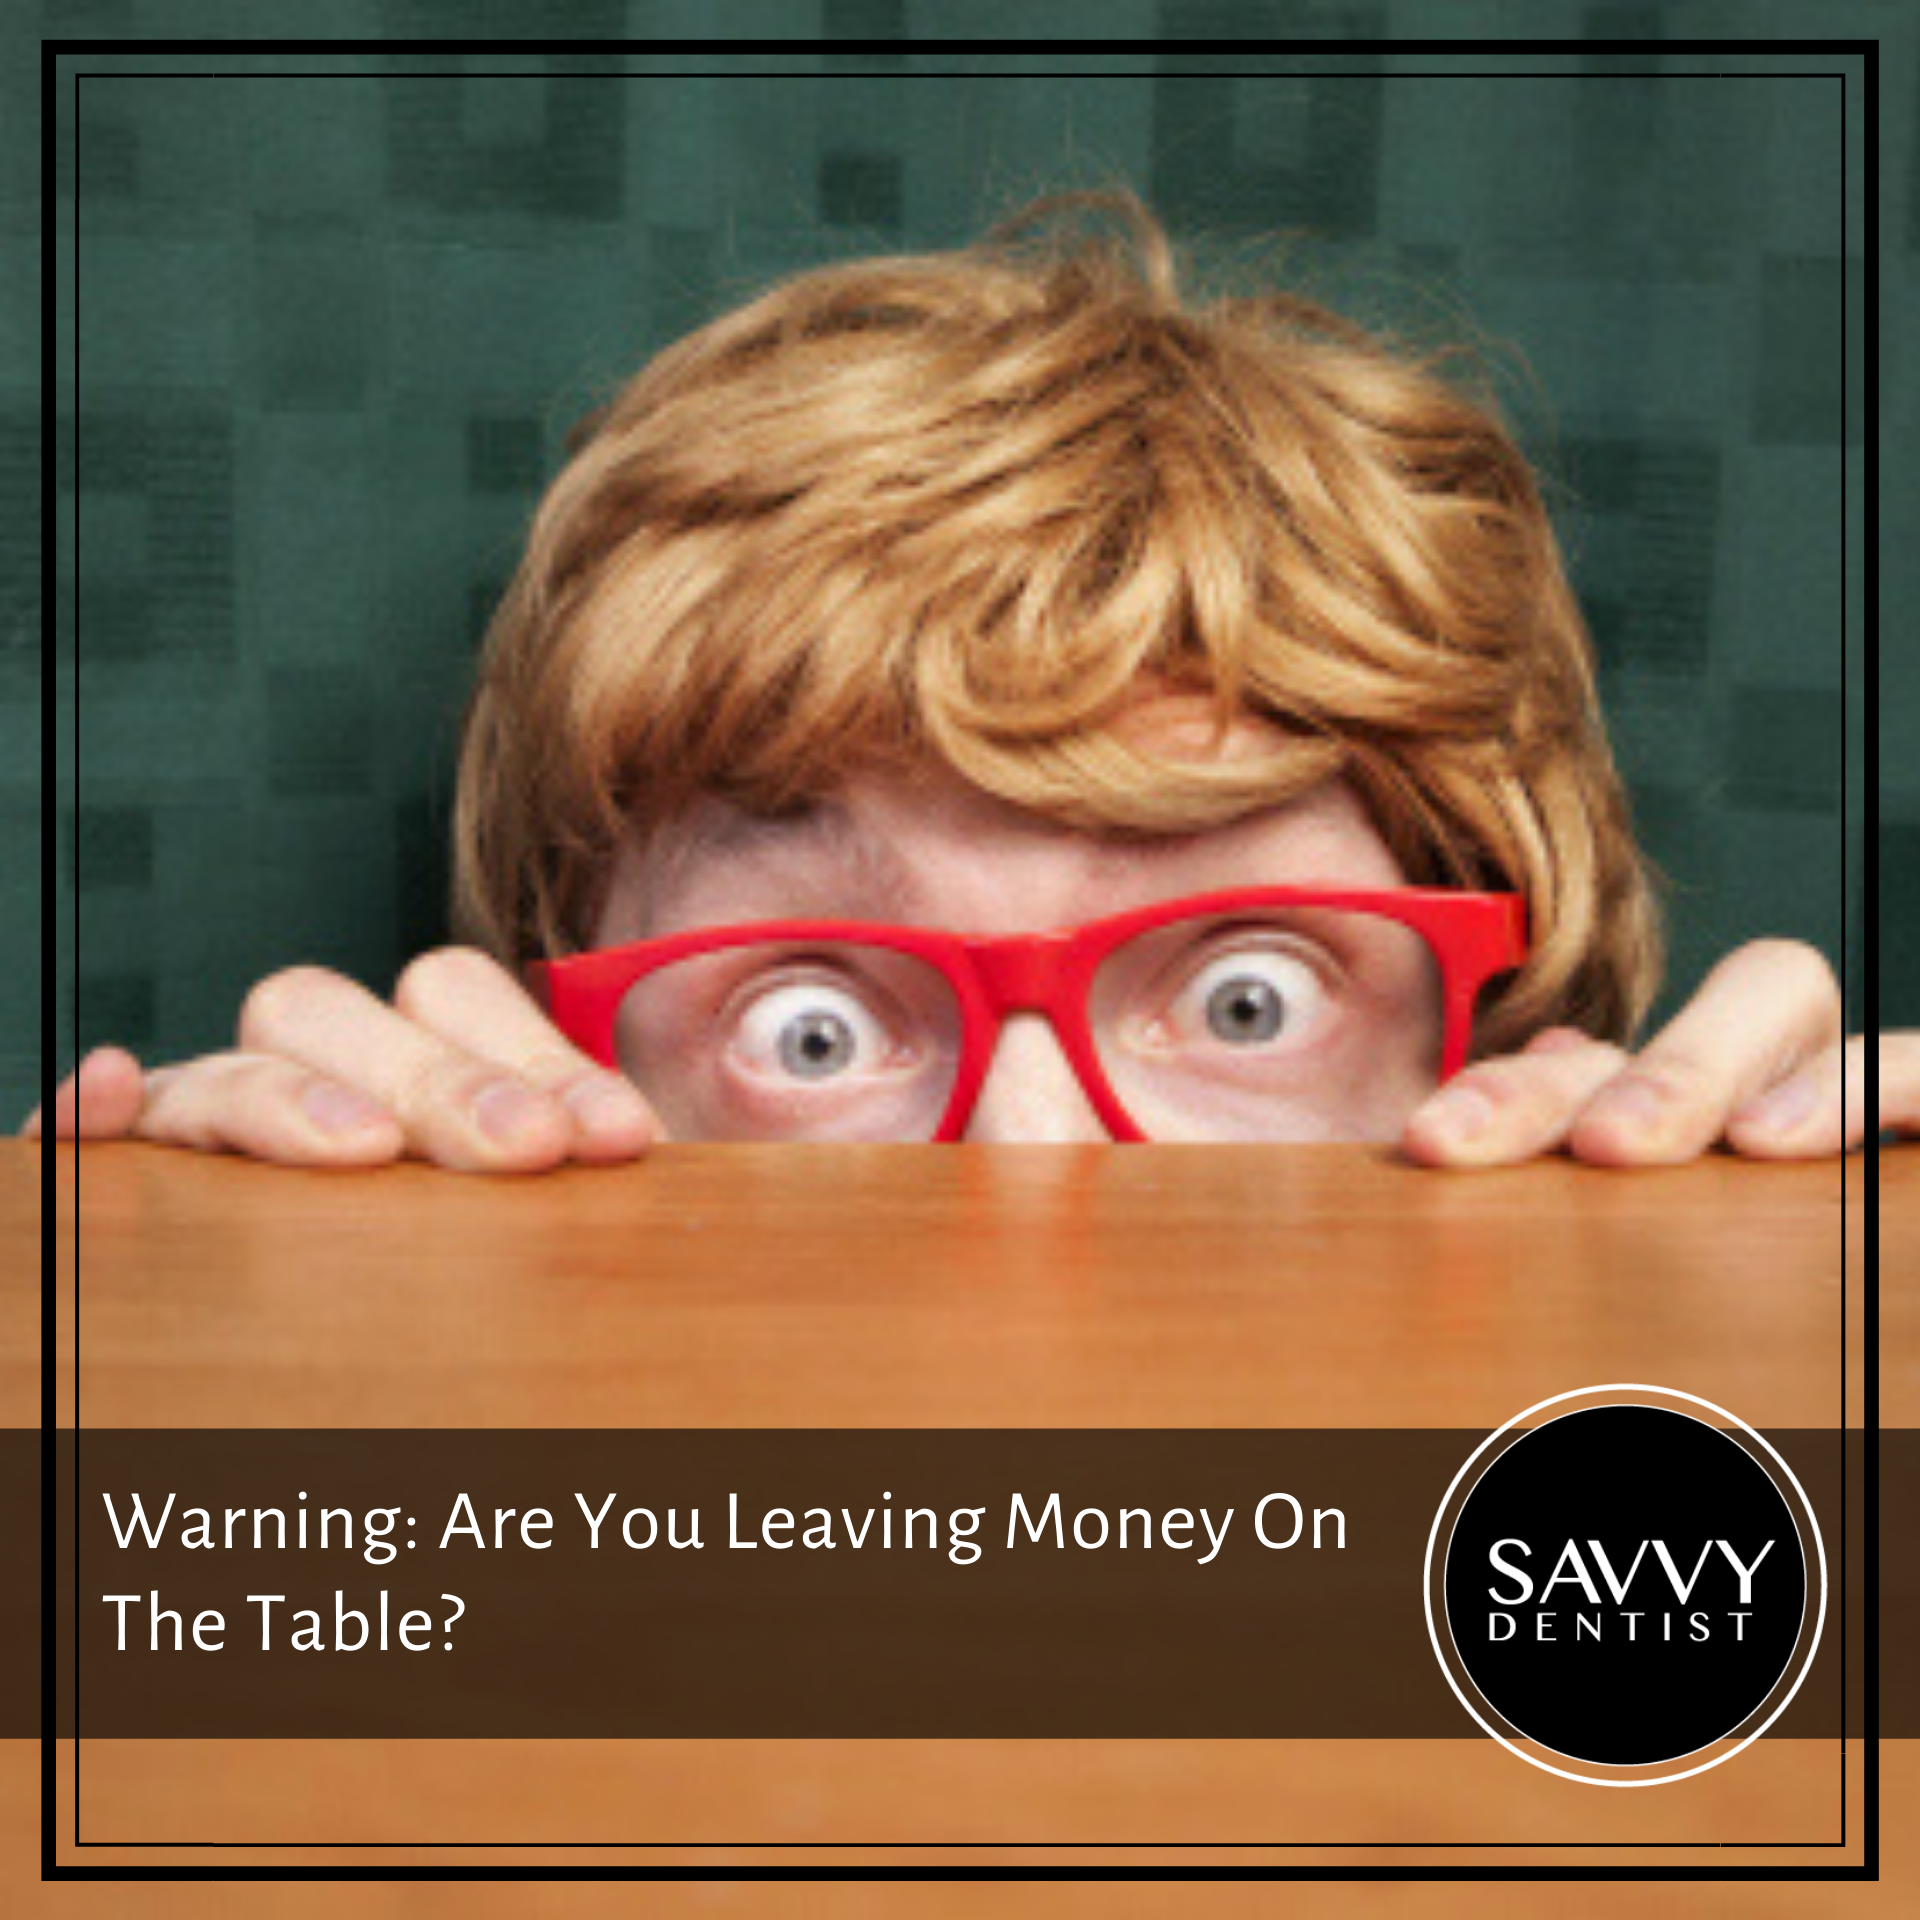 Warning: Are You Leaving Money On The Table?